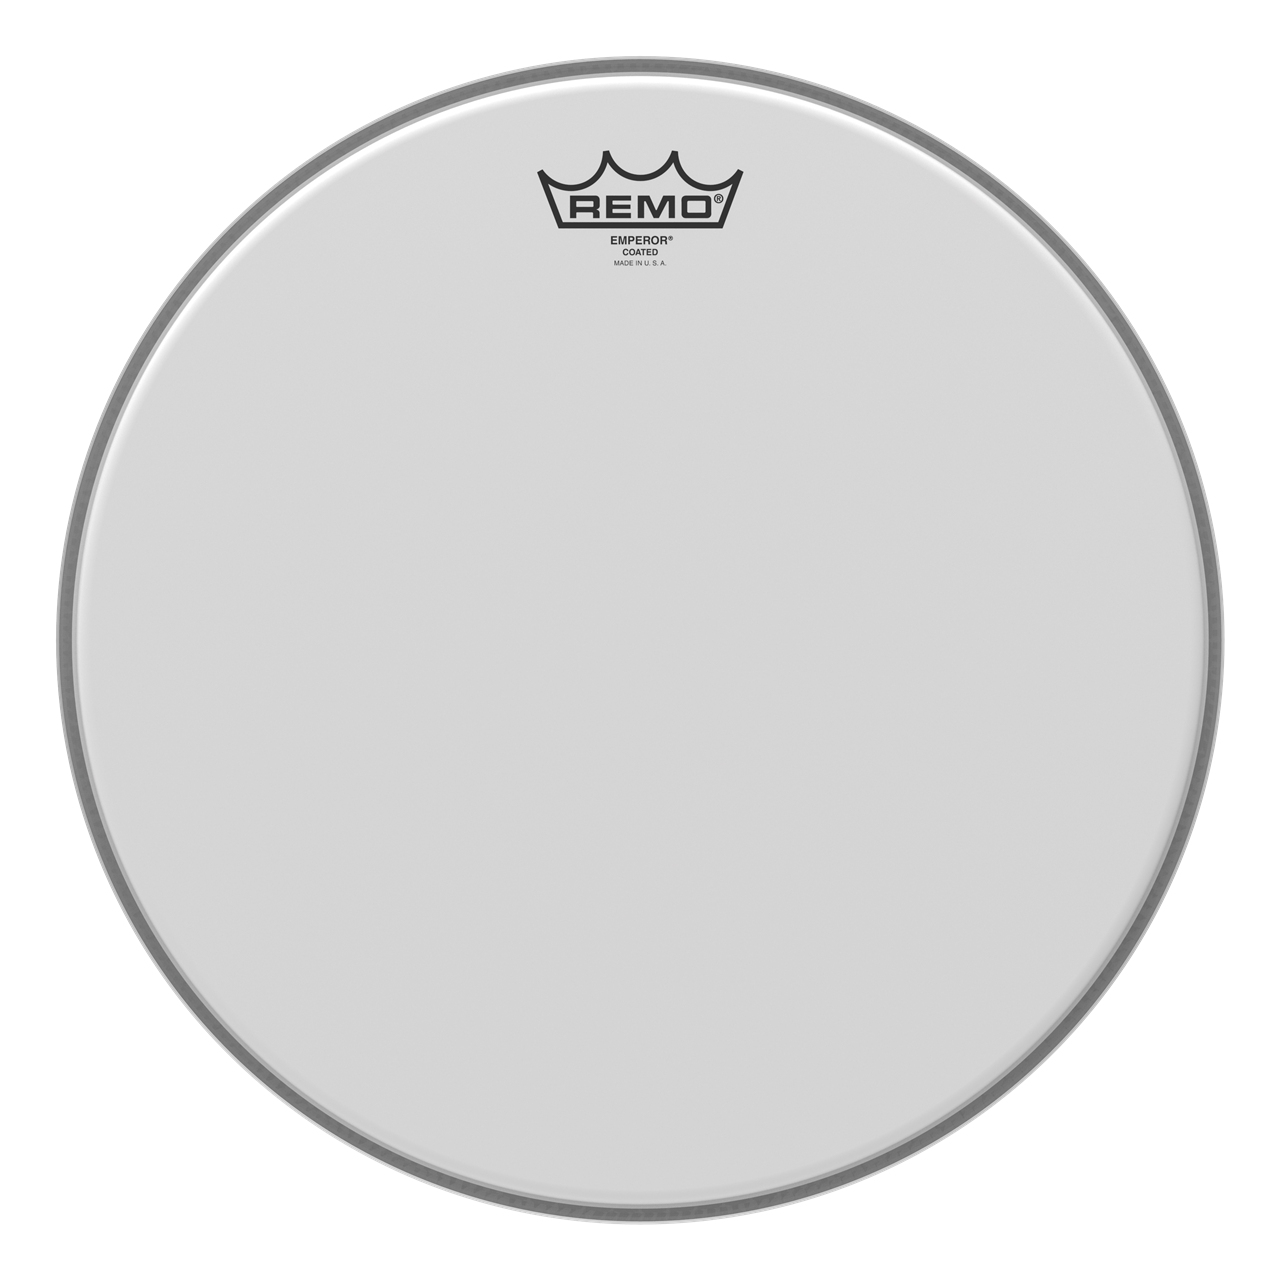 Remo BE-0108-00 Emperor, 8" Coated